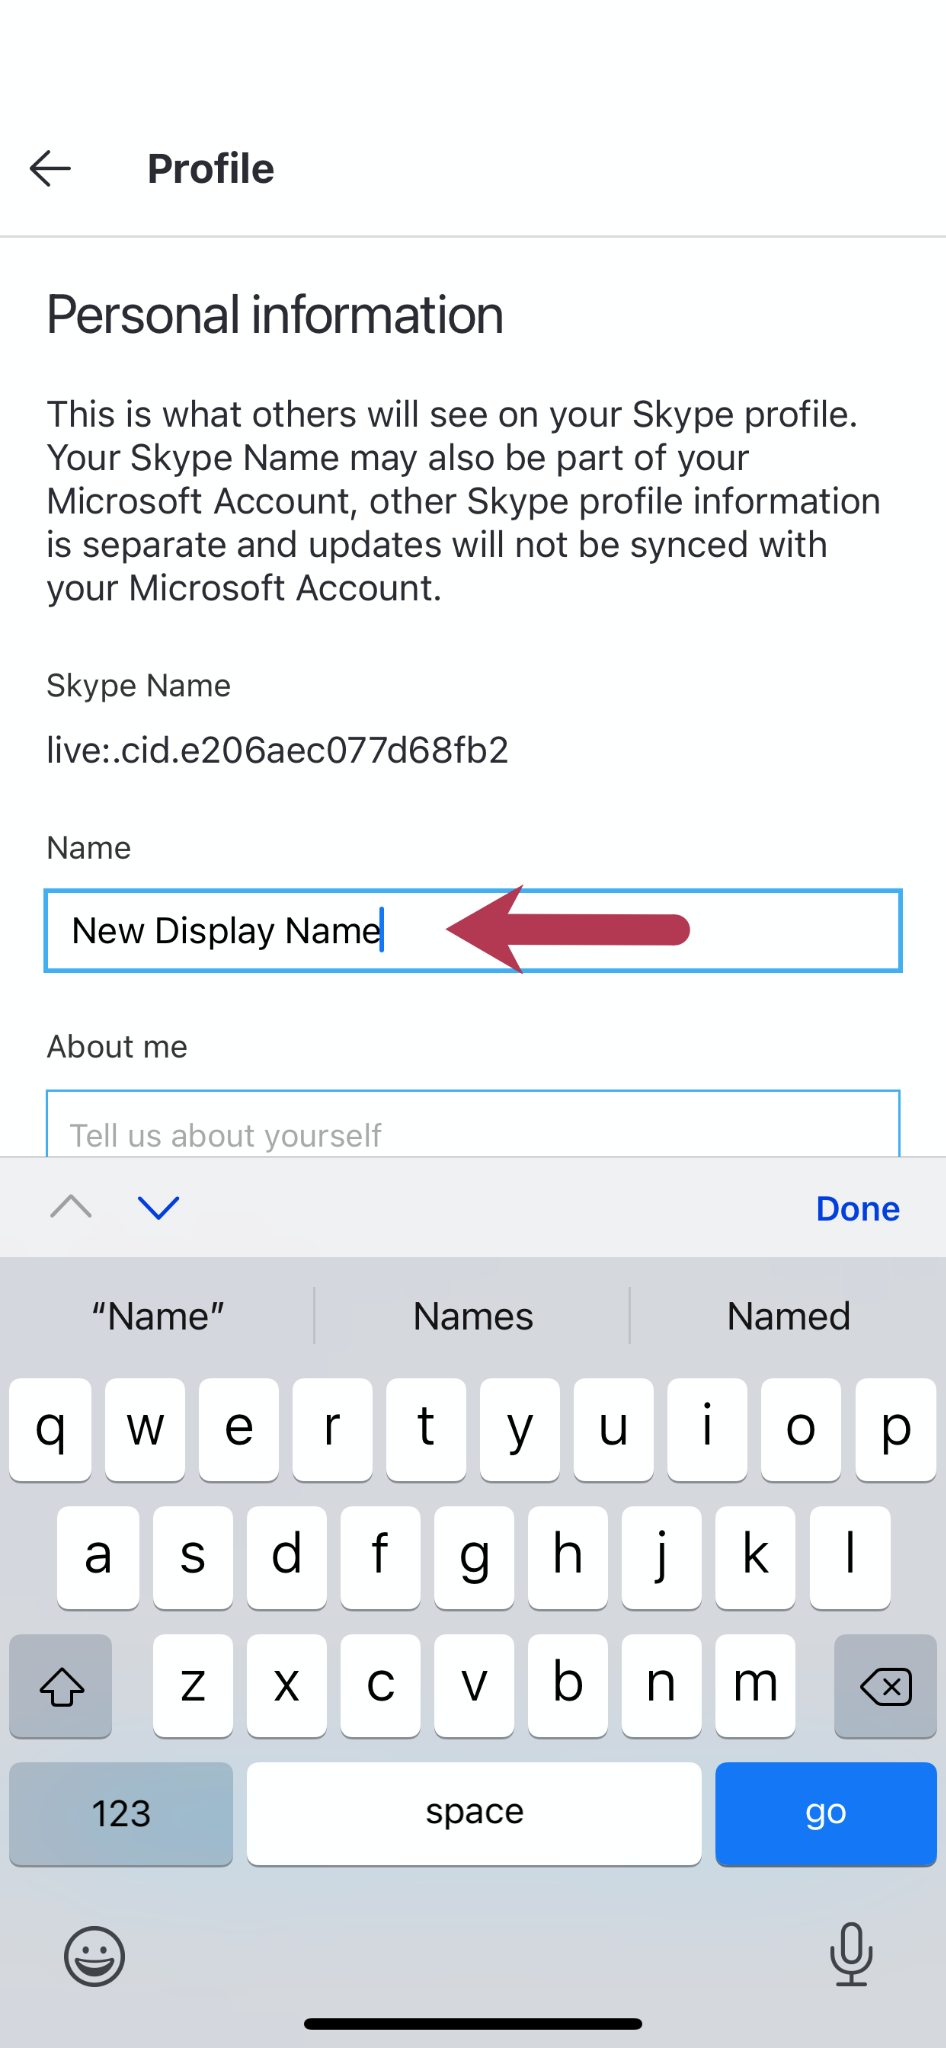 Type-your-new-display-name-in-the-text-field-under-“Name”